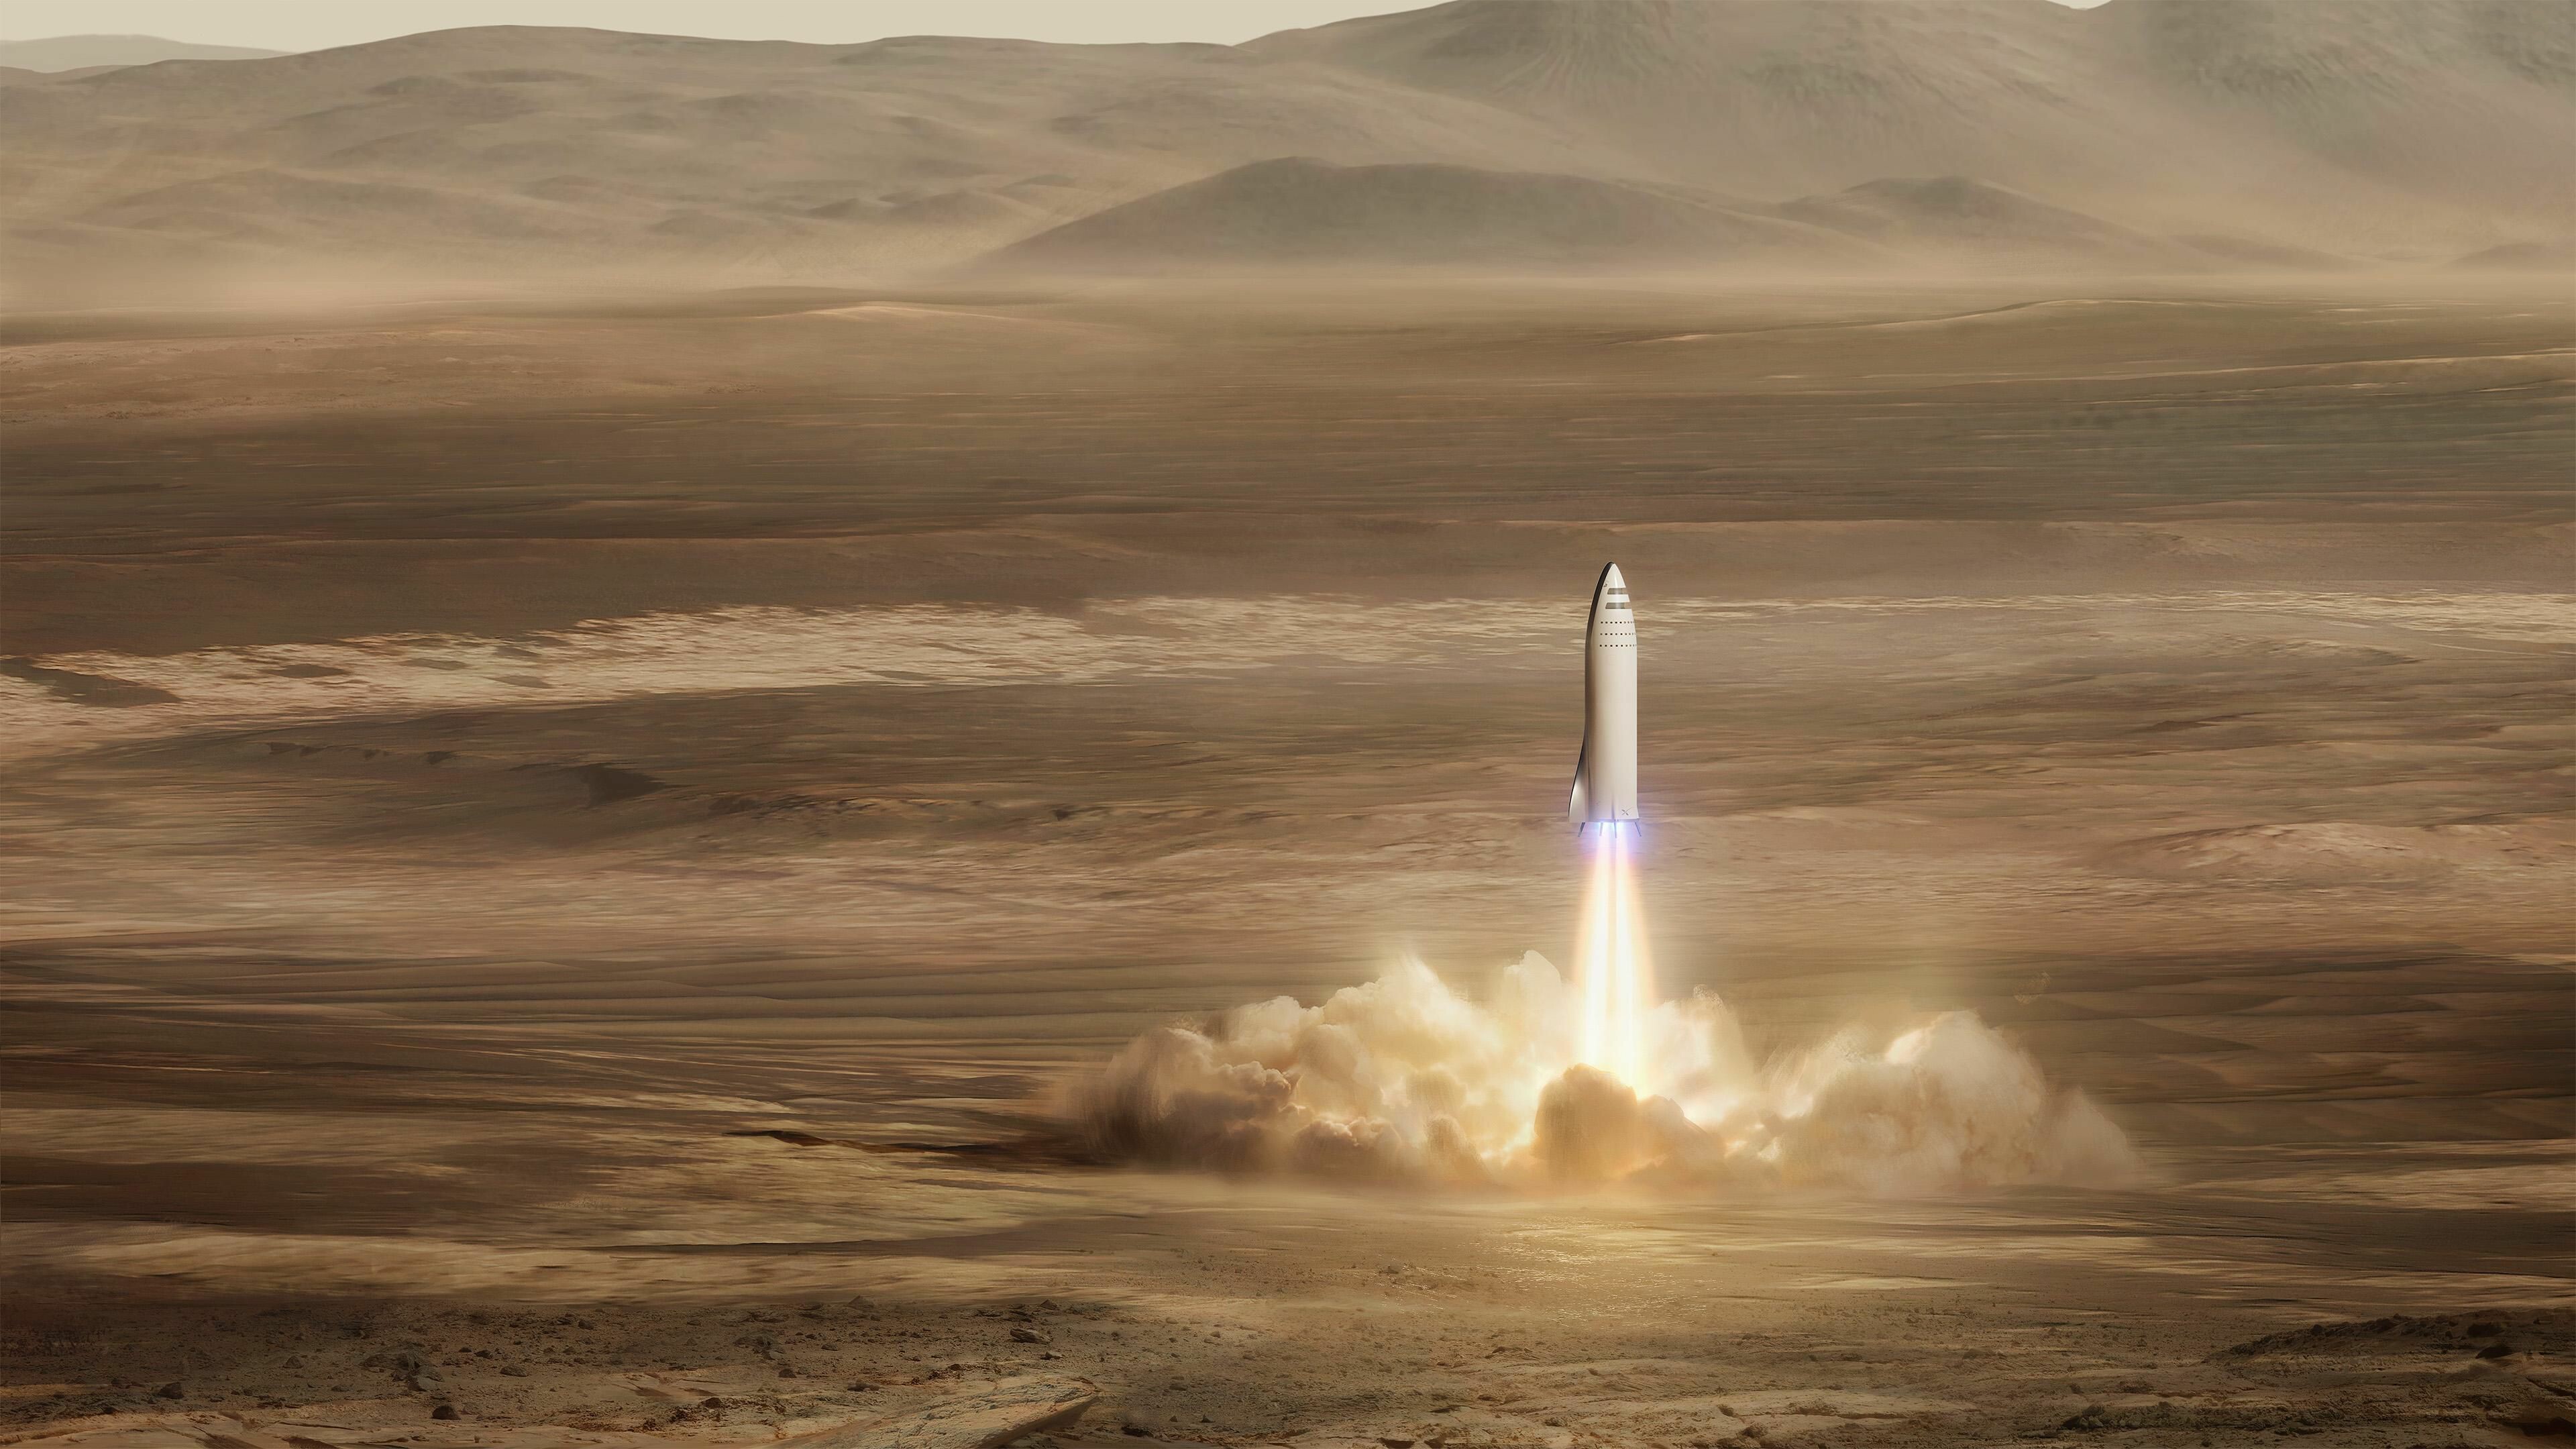 Mars: SpaceX Red Planet Mission, Big Rocket Launch. 3840x2160 4K Wallpaper.